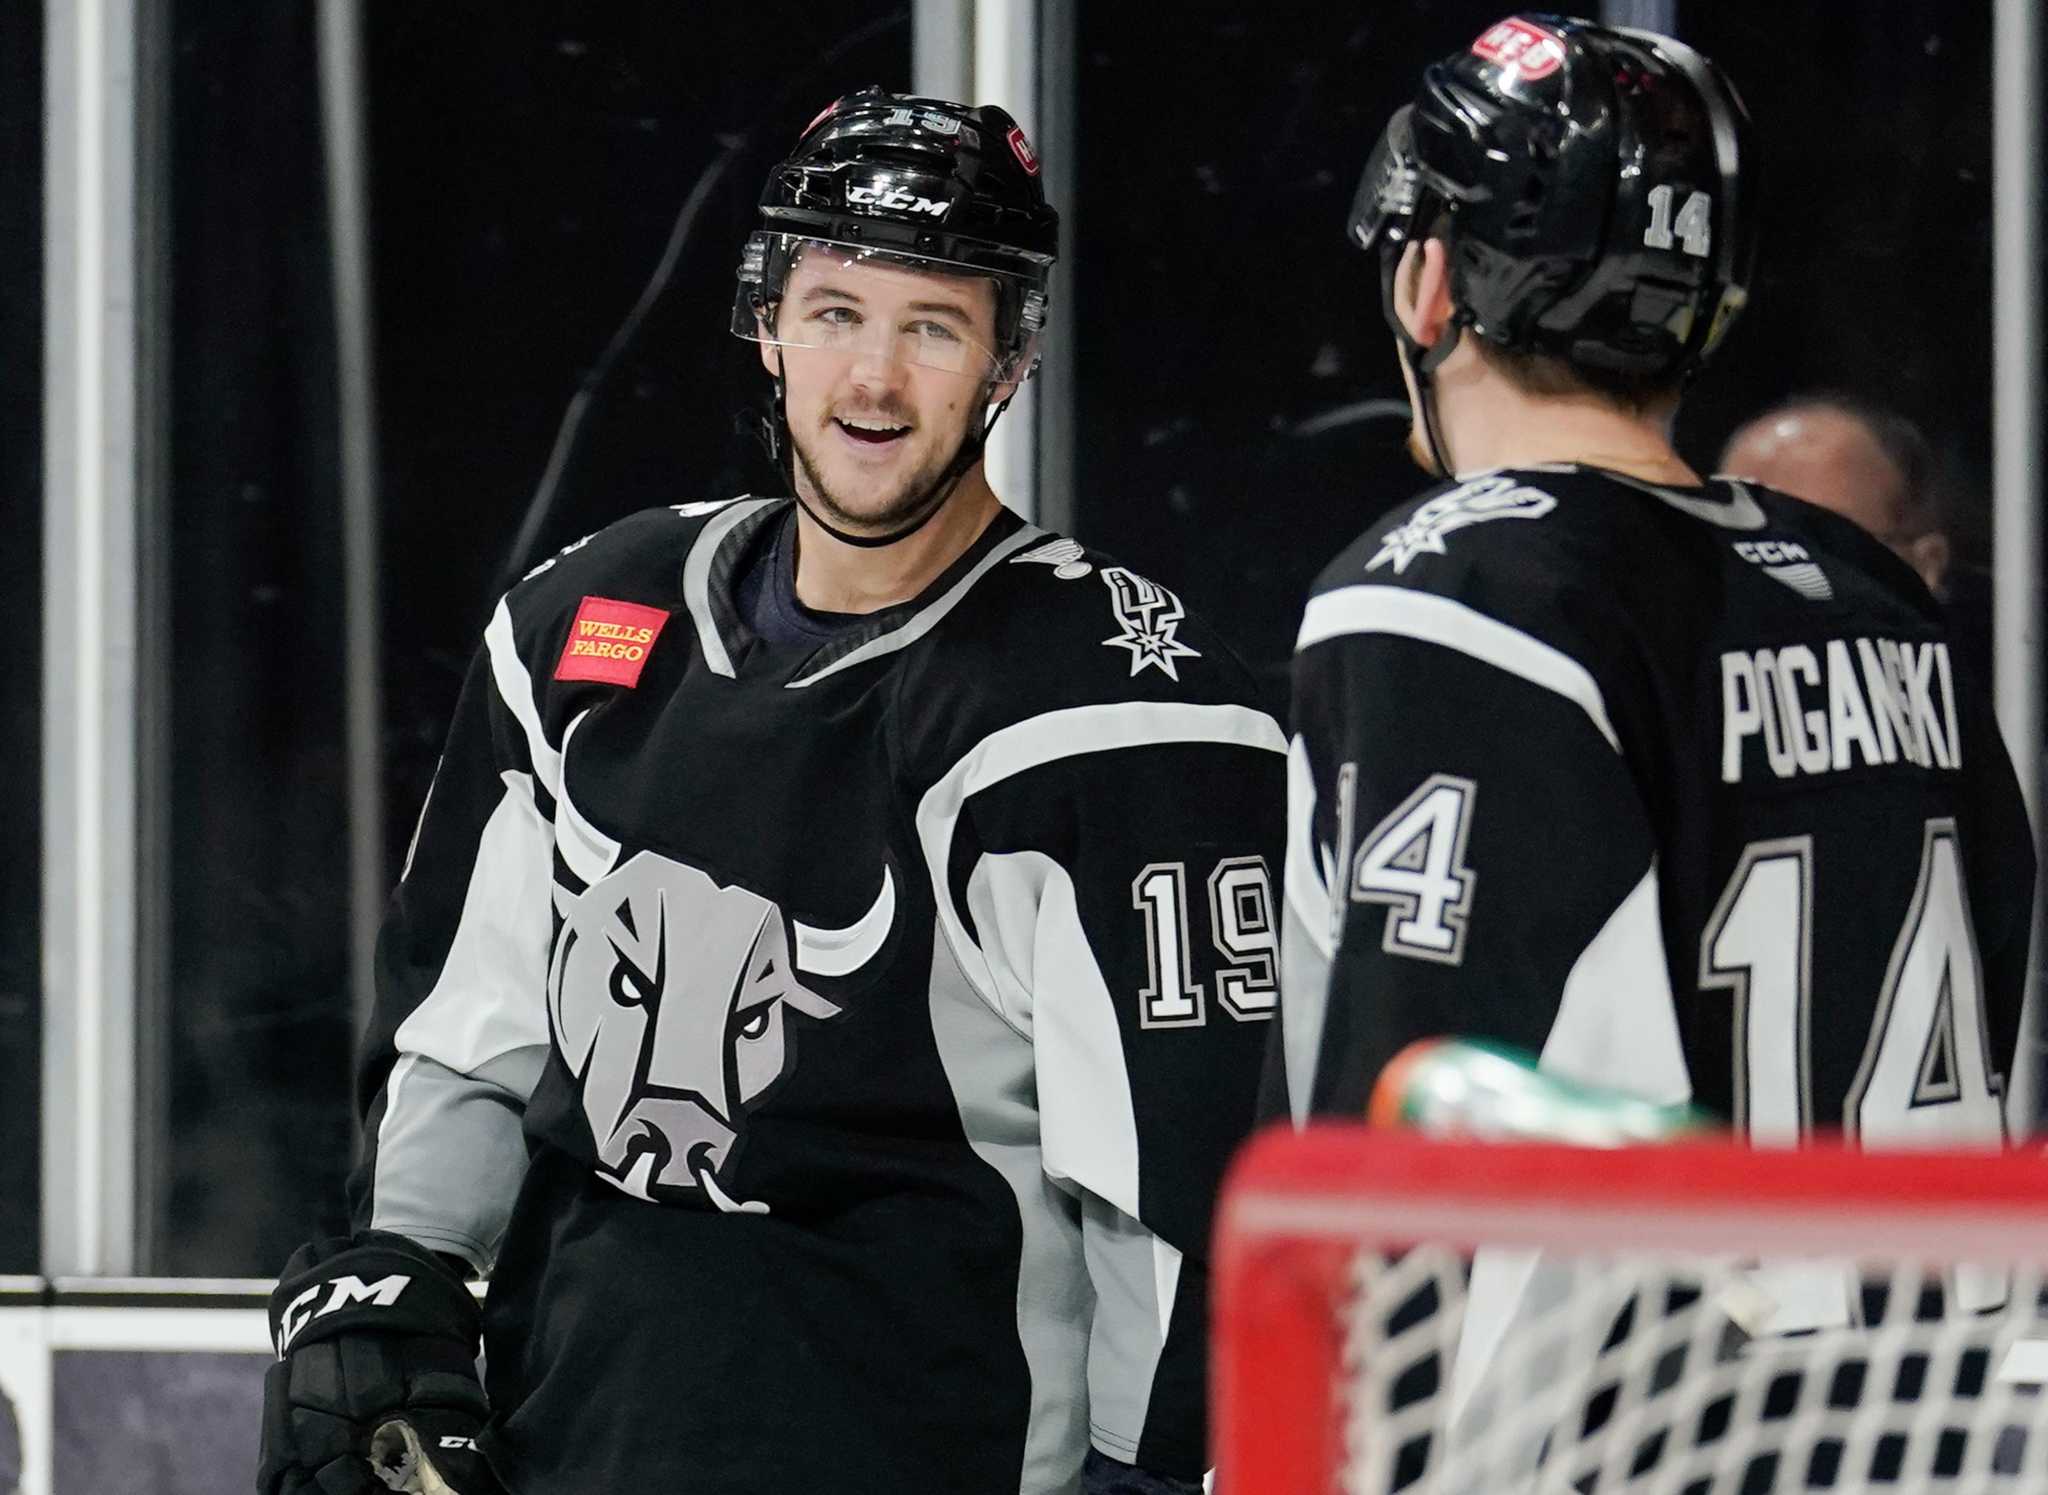 Rampage Win Two AHL Team Business Services Awards - OurSports Central